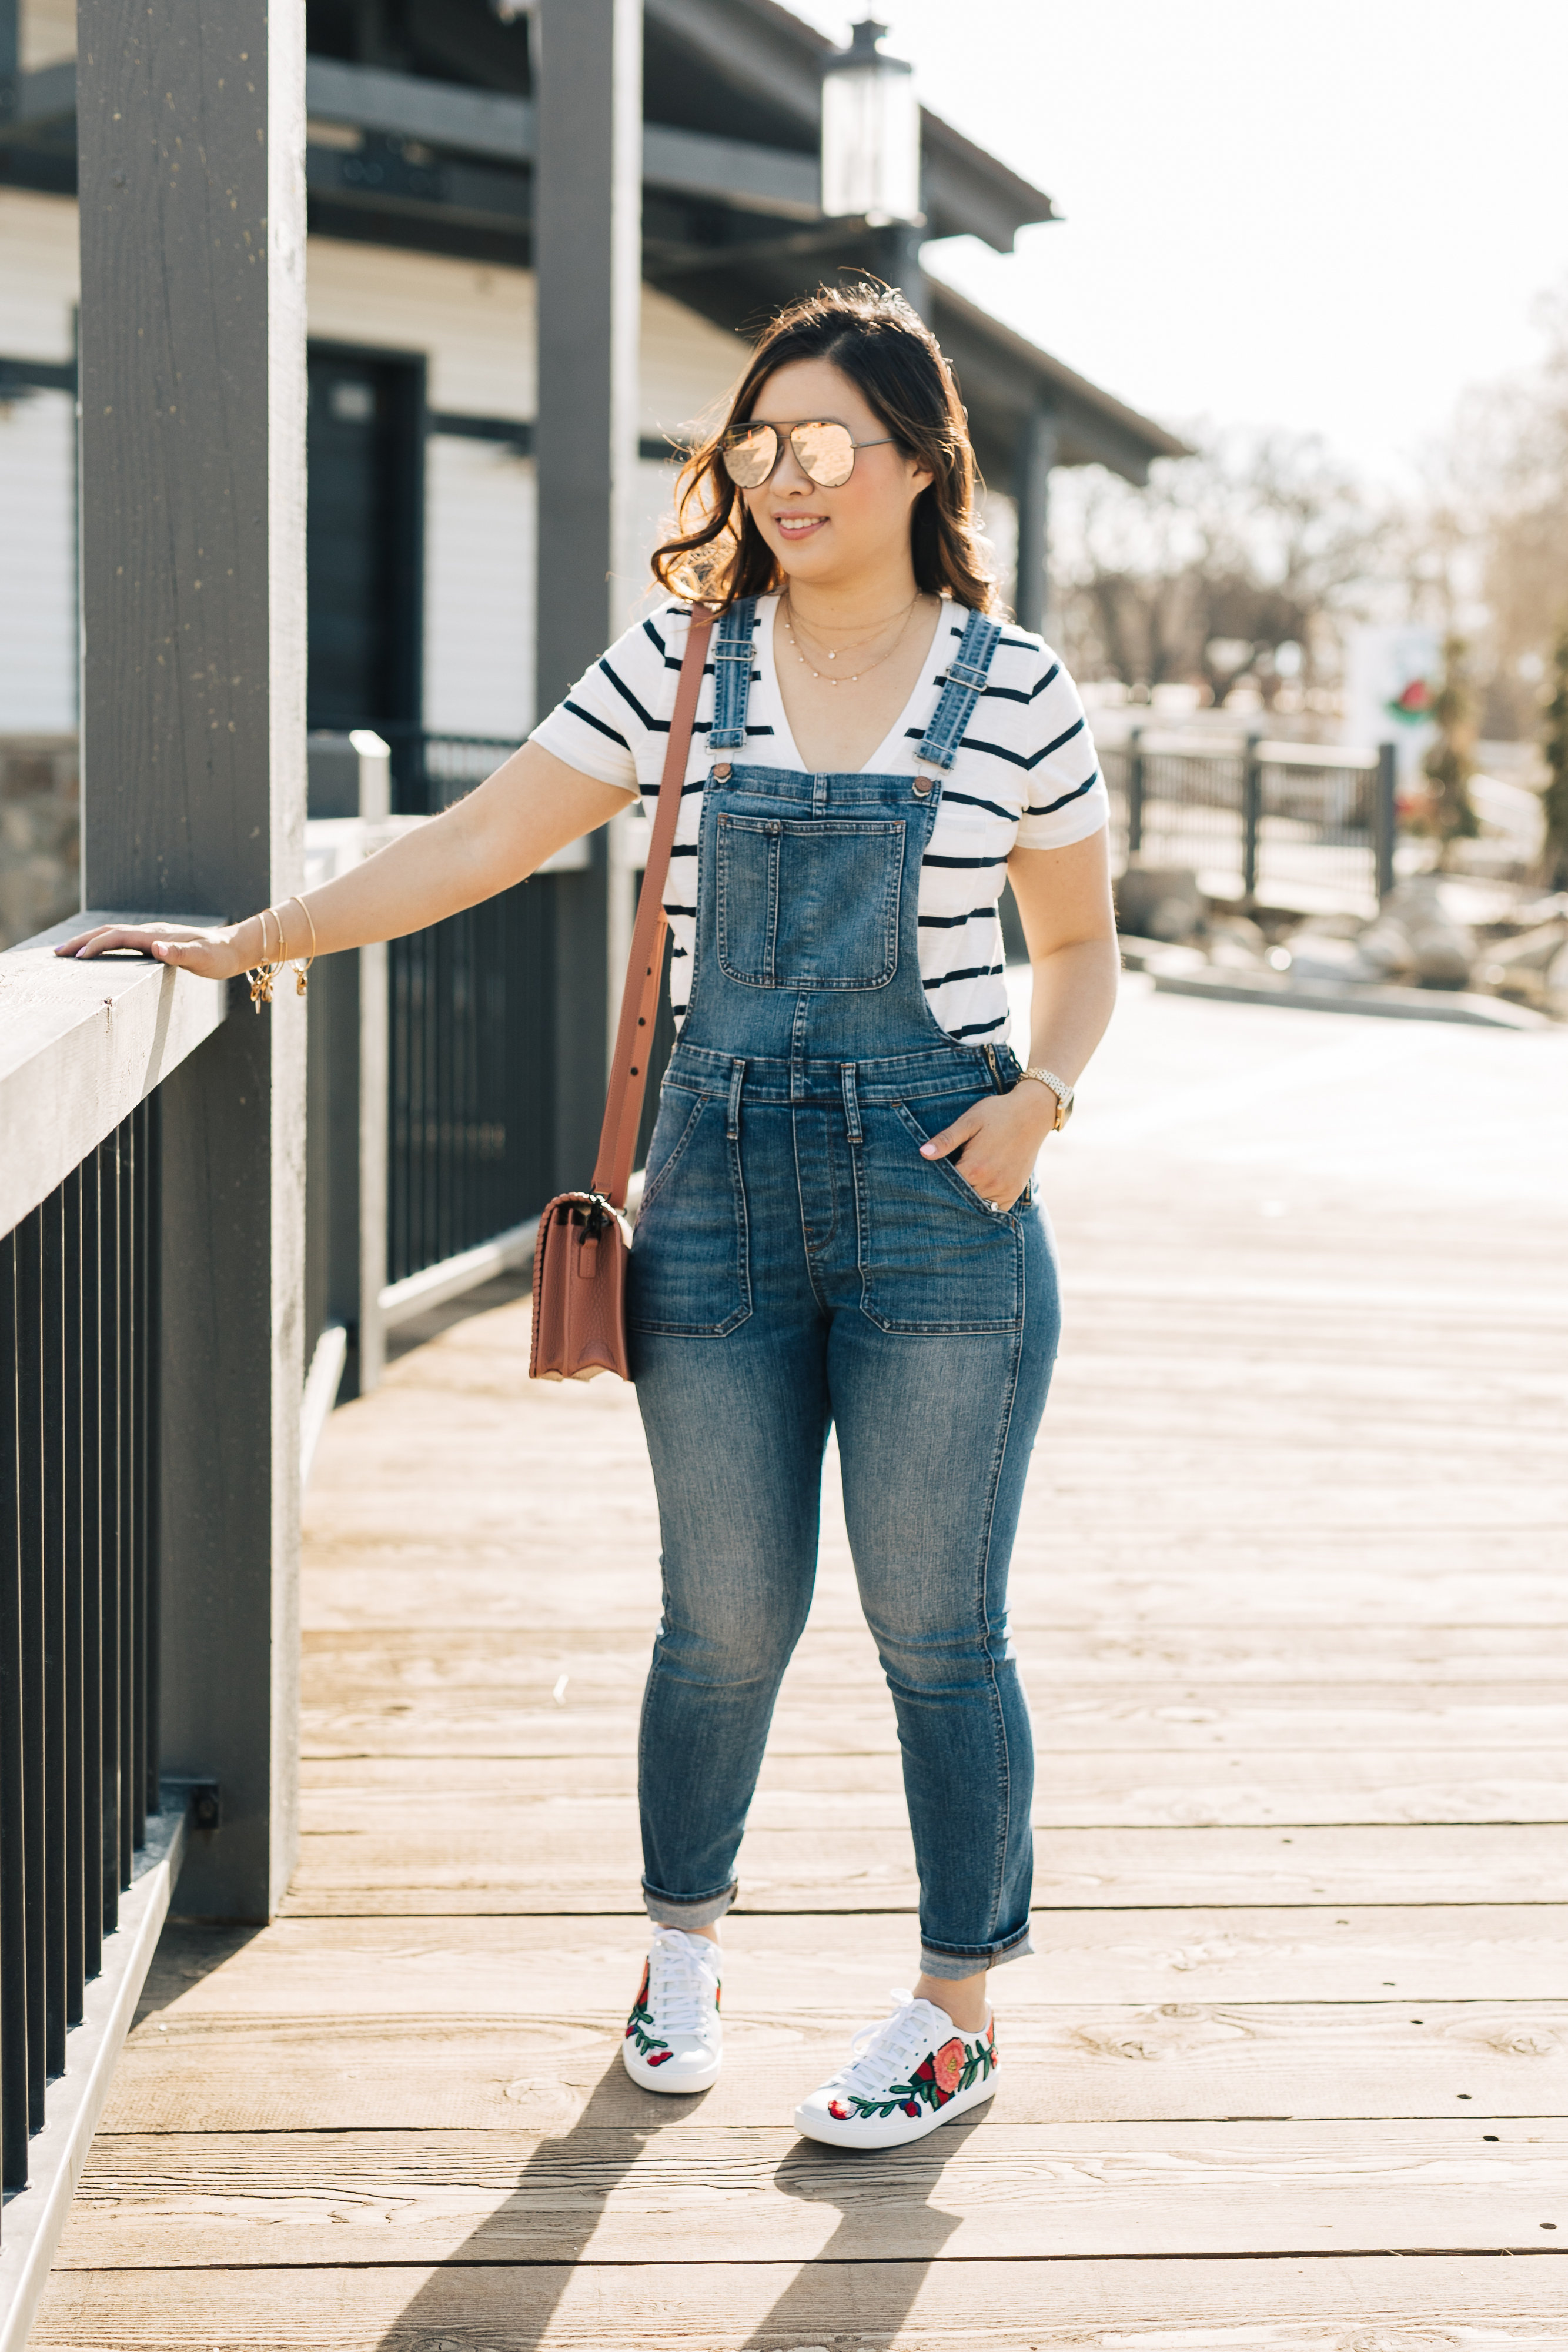 The Best Overalls For Easy Fall Dressing